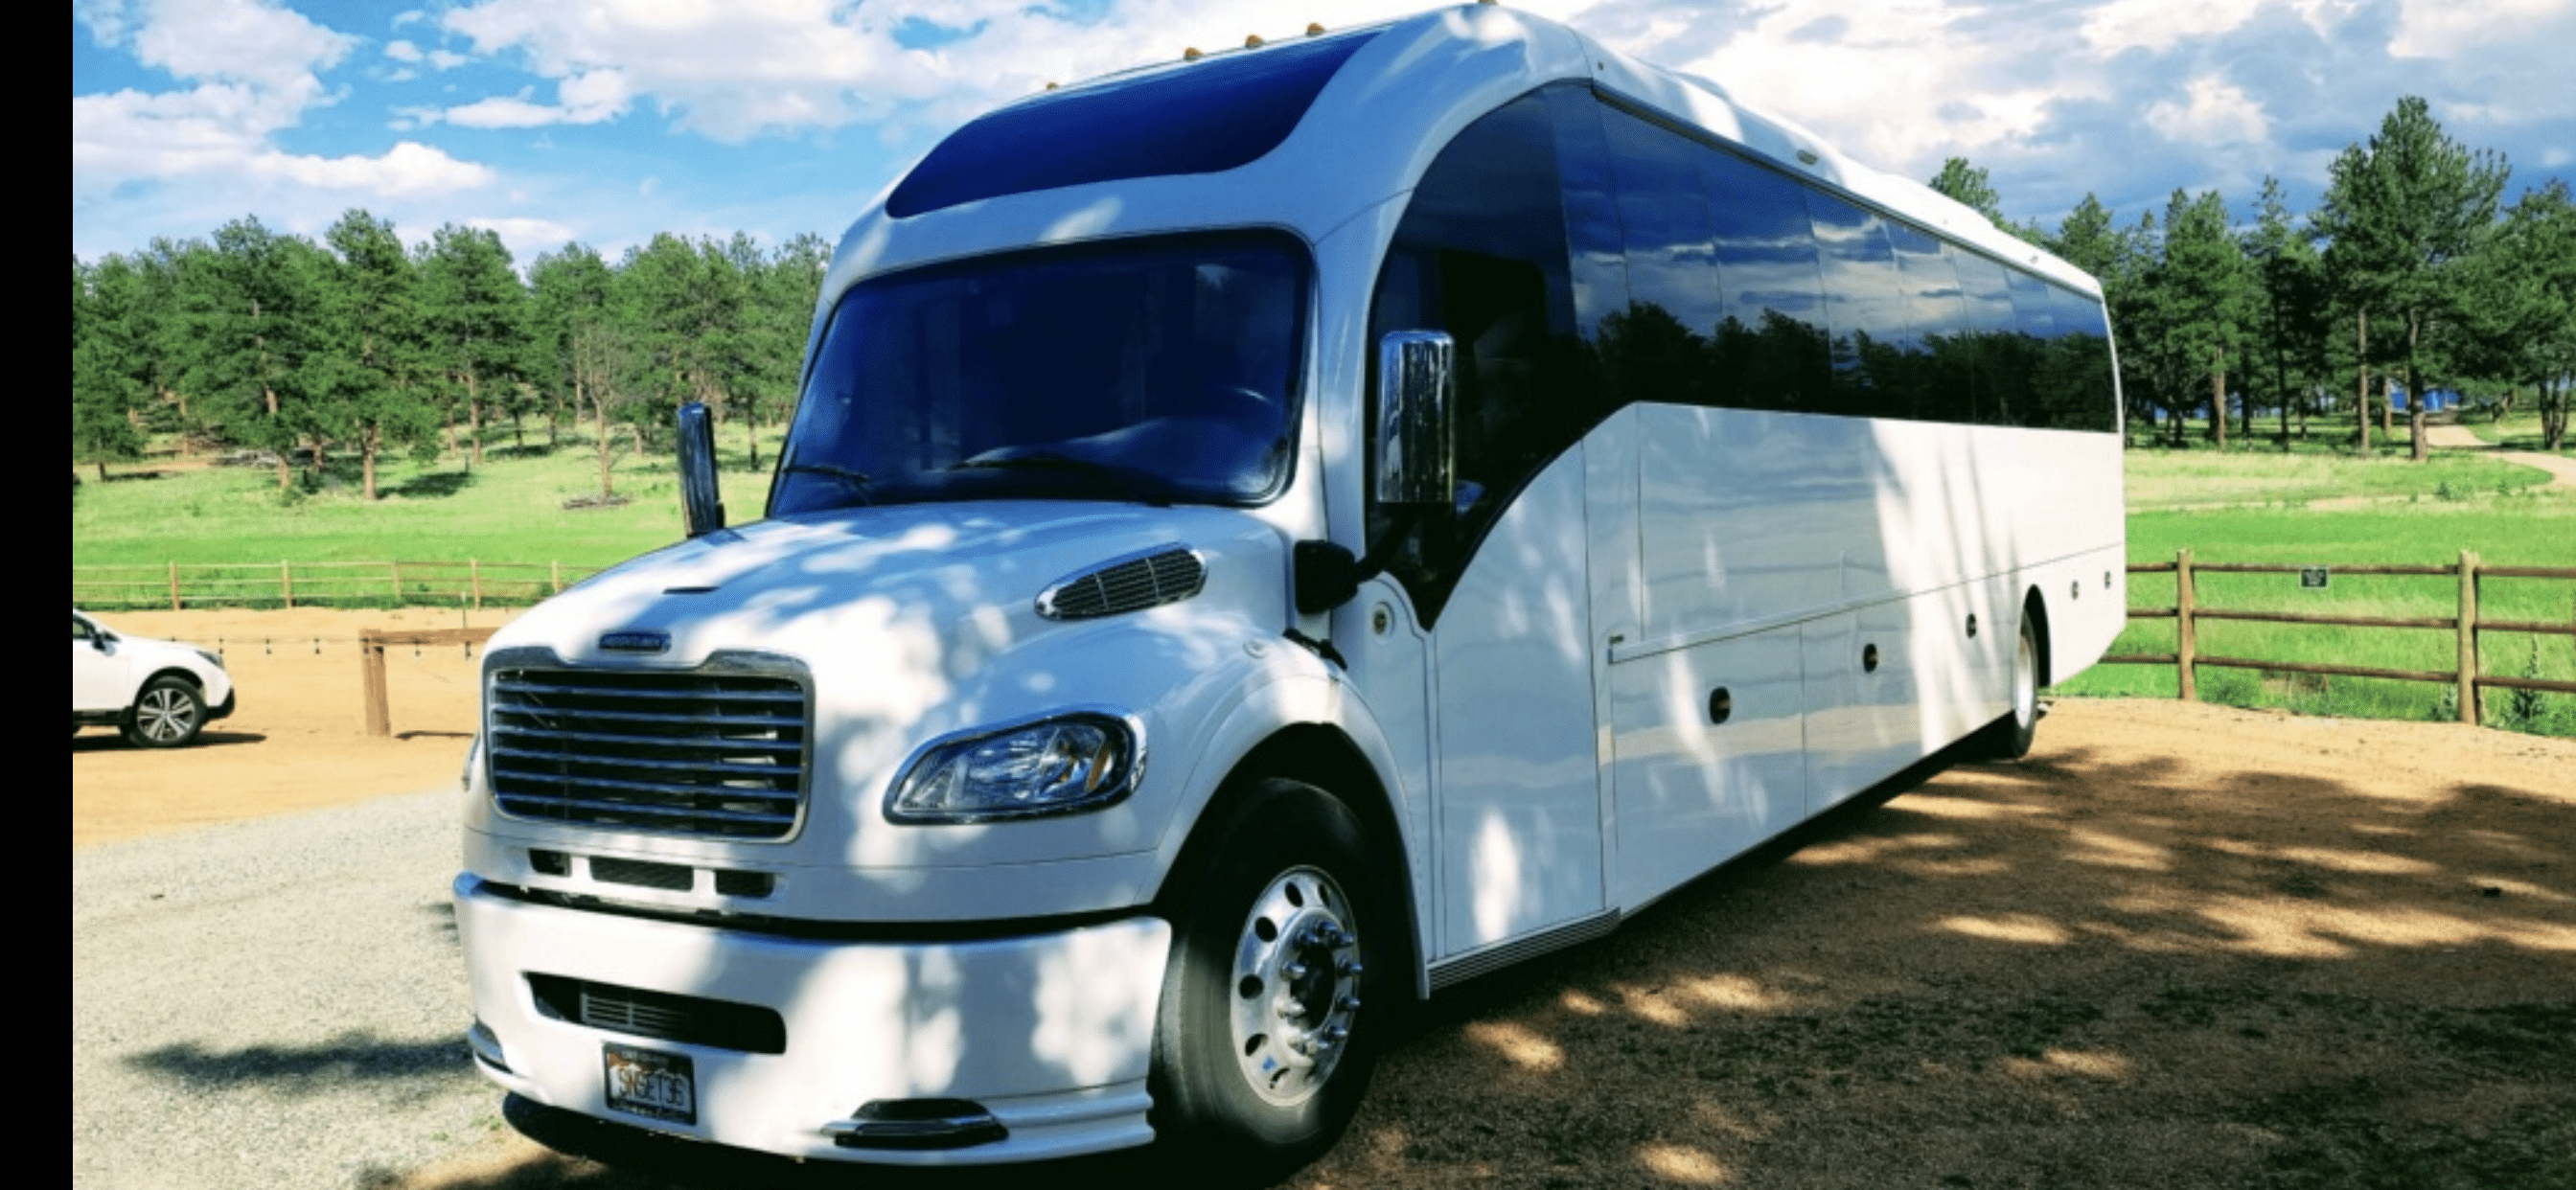 A white party bus with tinted windows